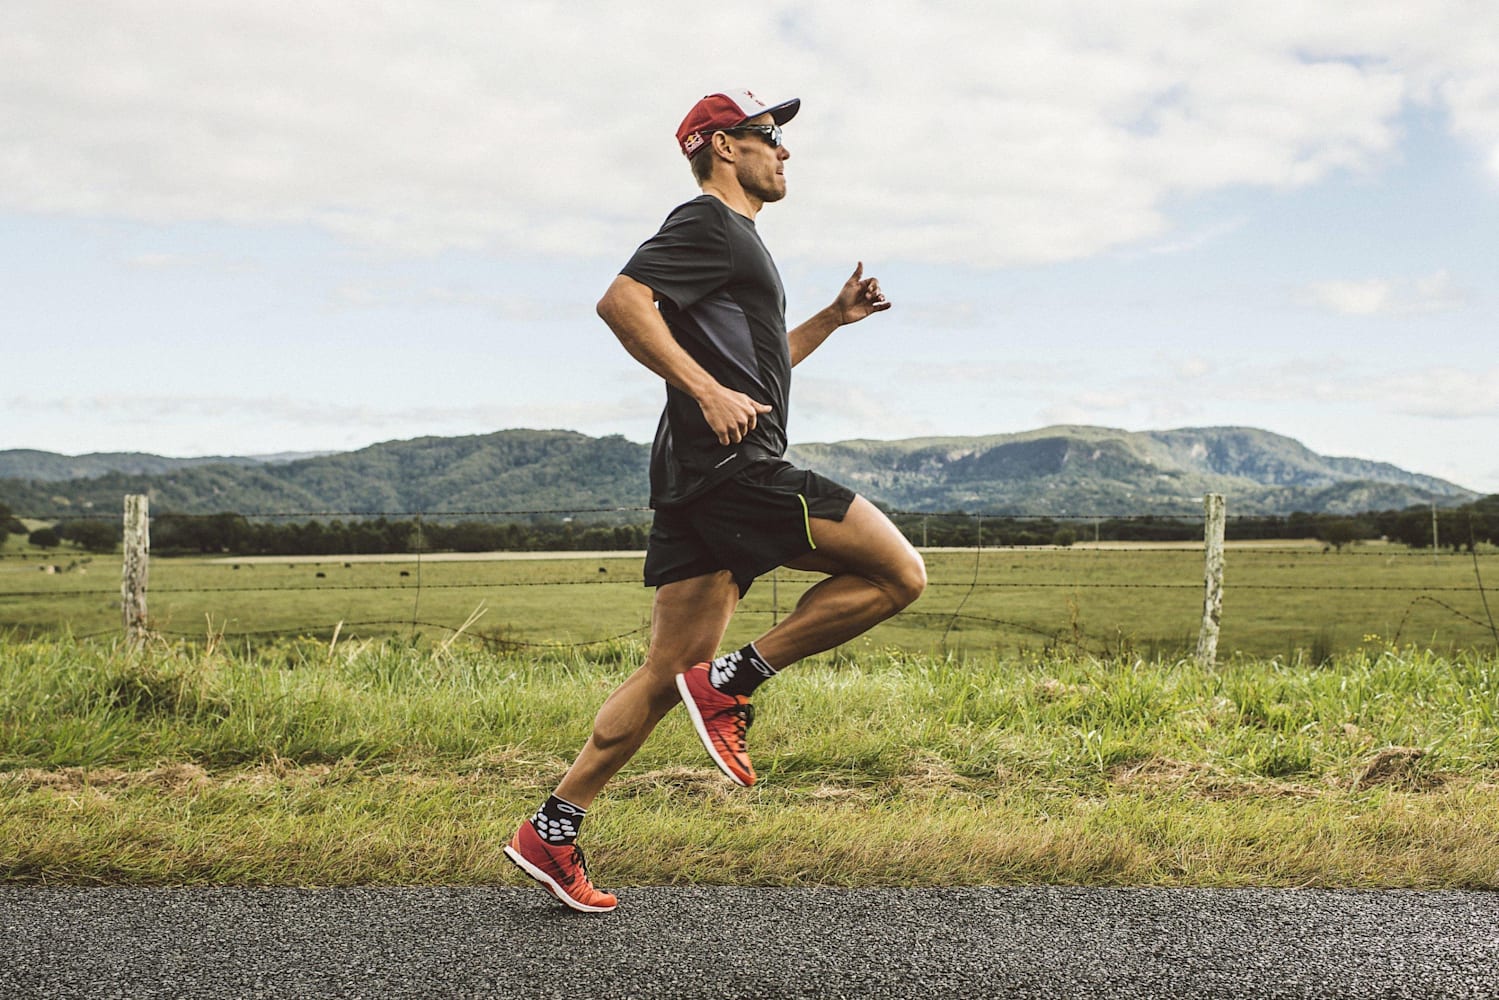 7 of the best running workouts to build endurance, strength and